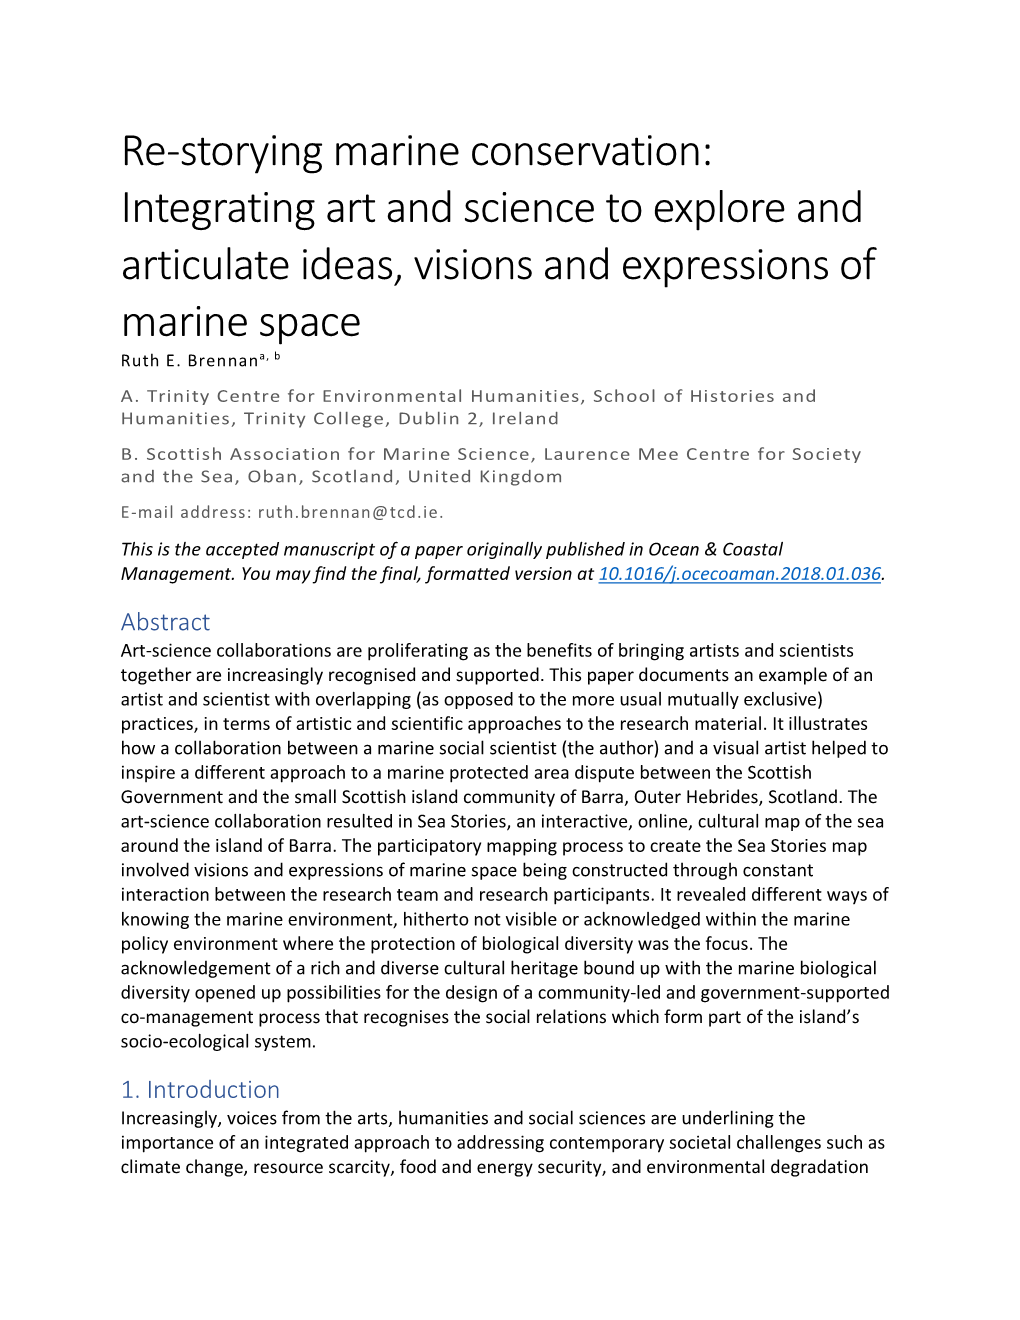 Re-Storying Marine Conservation: Integrating Art and Science to Explore and Articulate Ideas, Visions and Expressions of Marine Space Ruth E